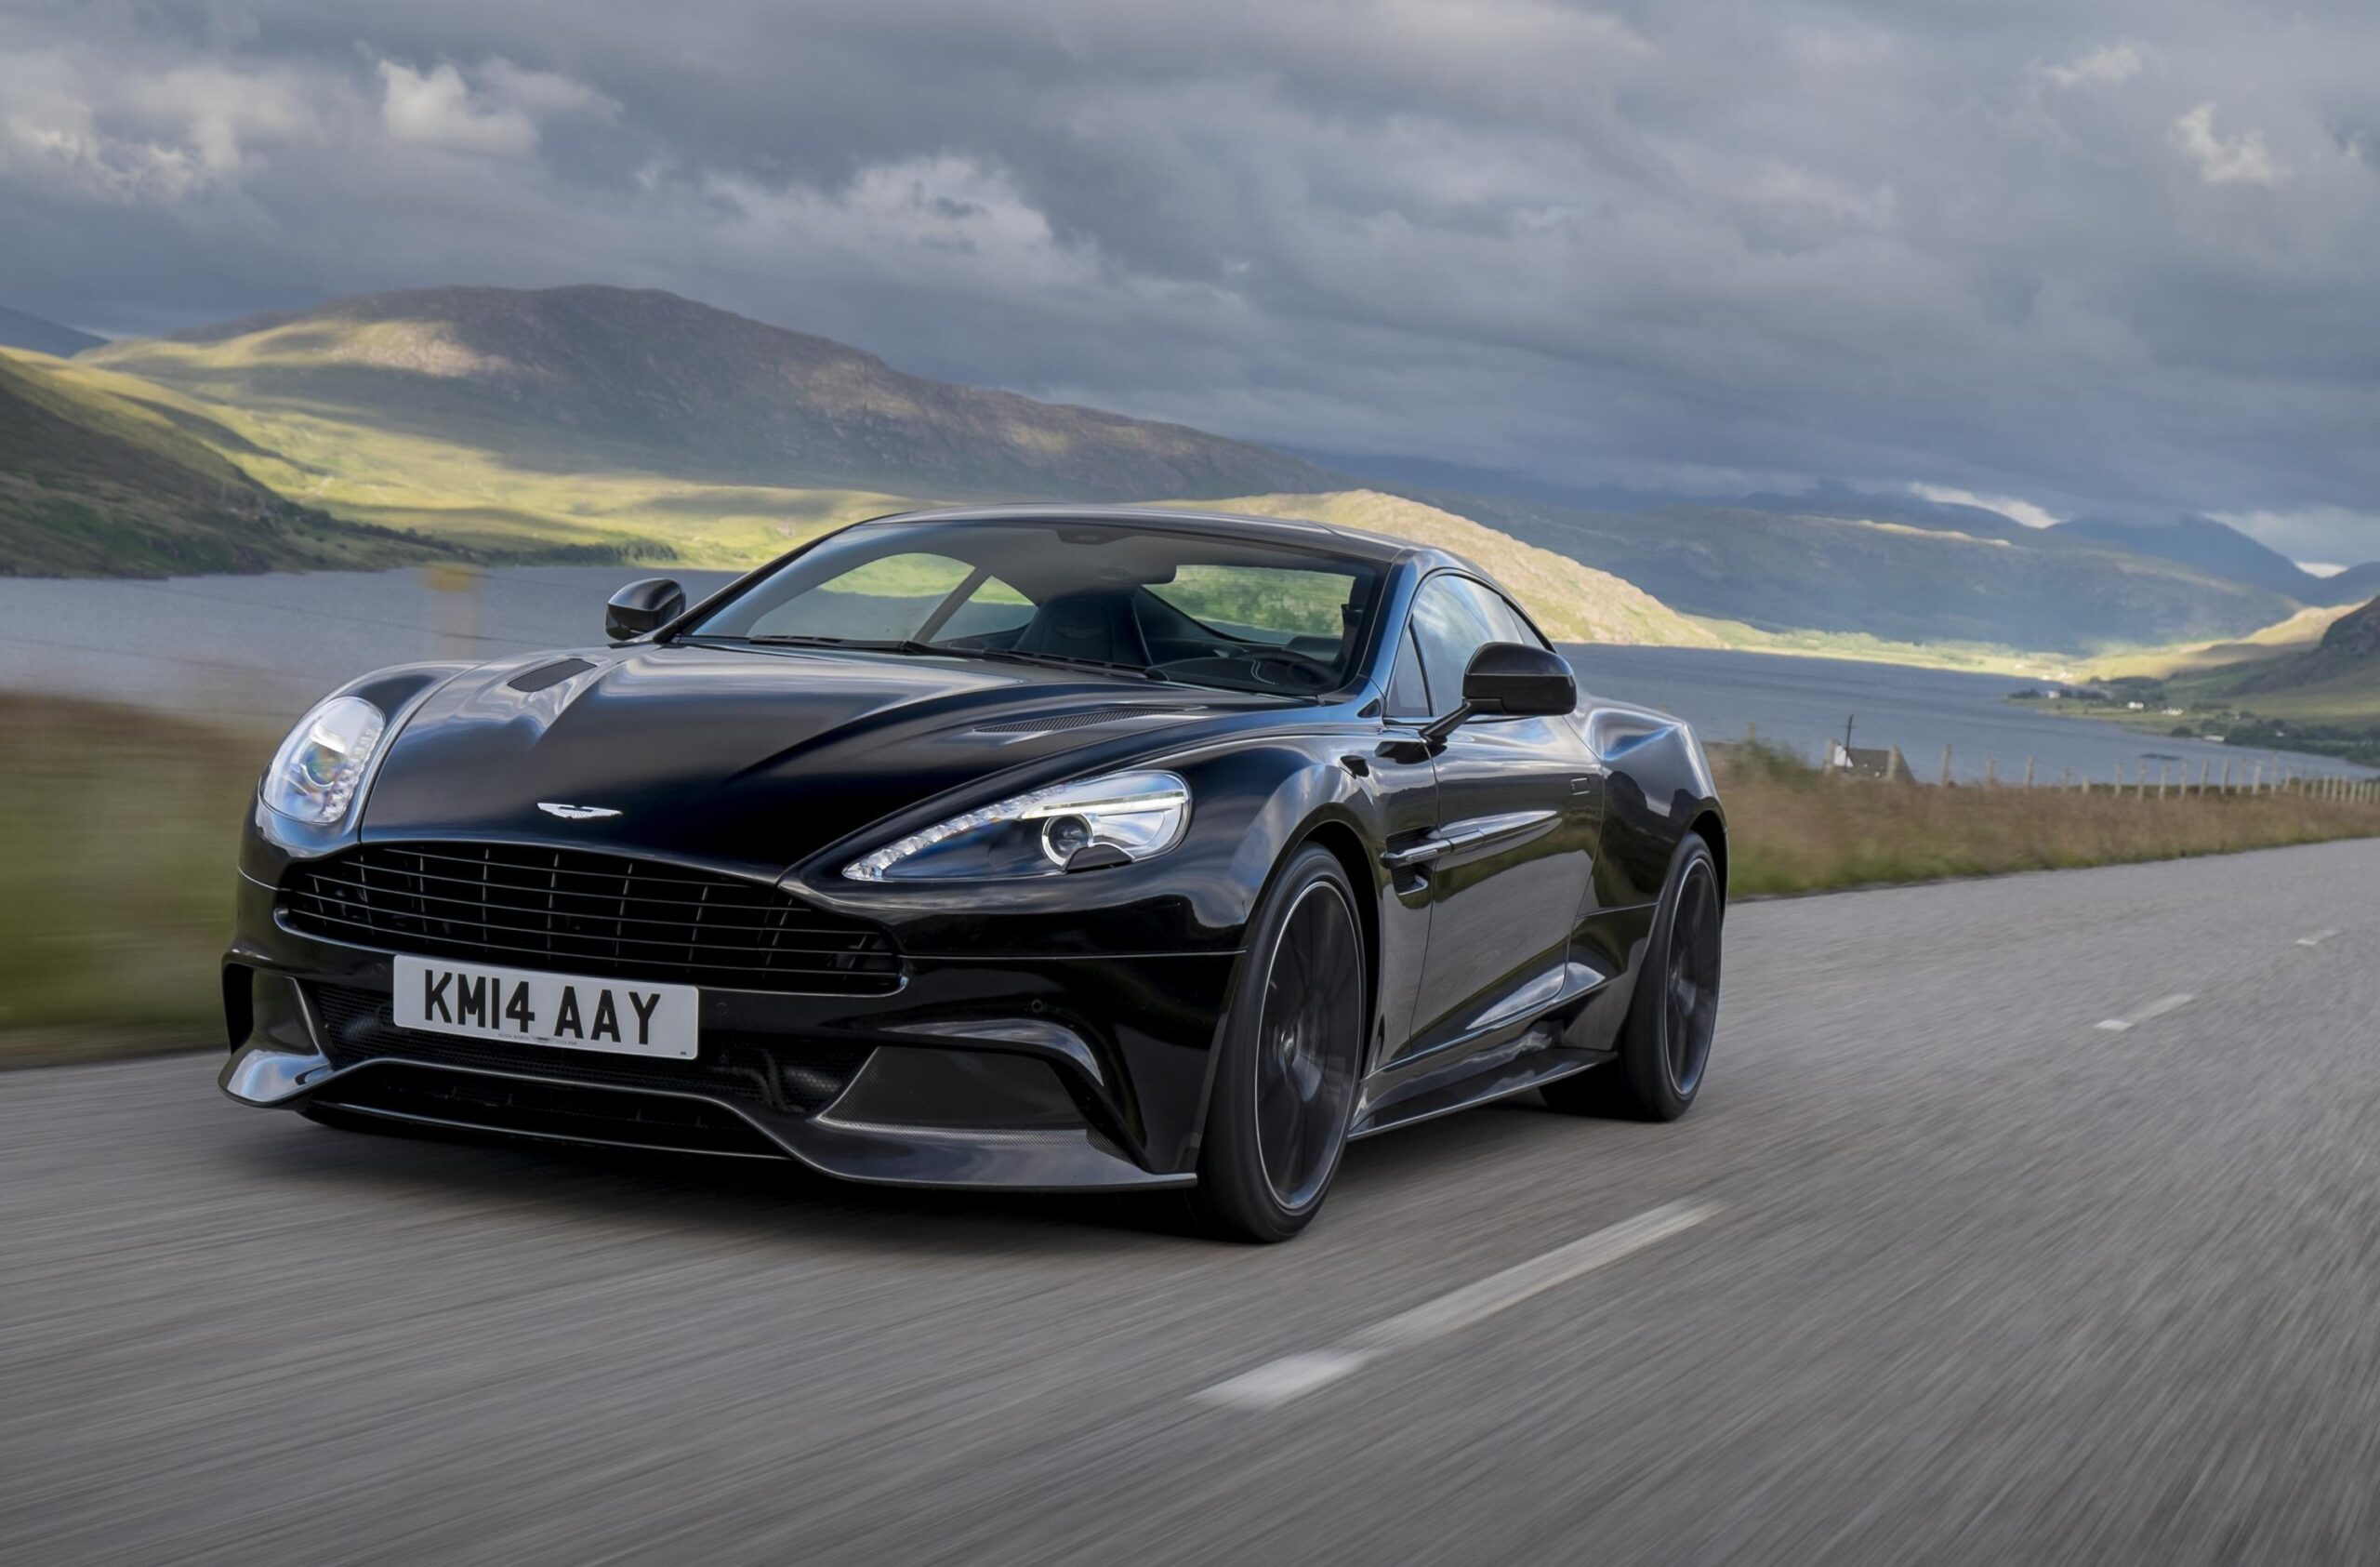 Aston Martin Vanquish Wallpapers, Pictures, Image